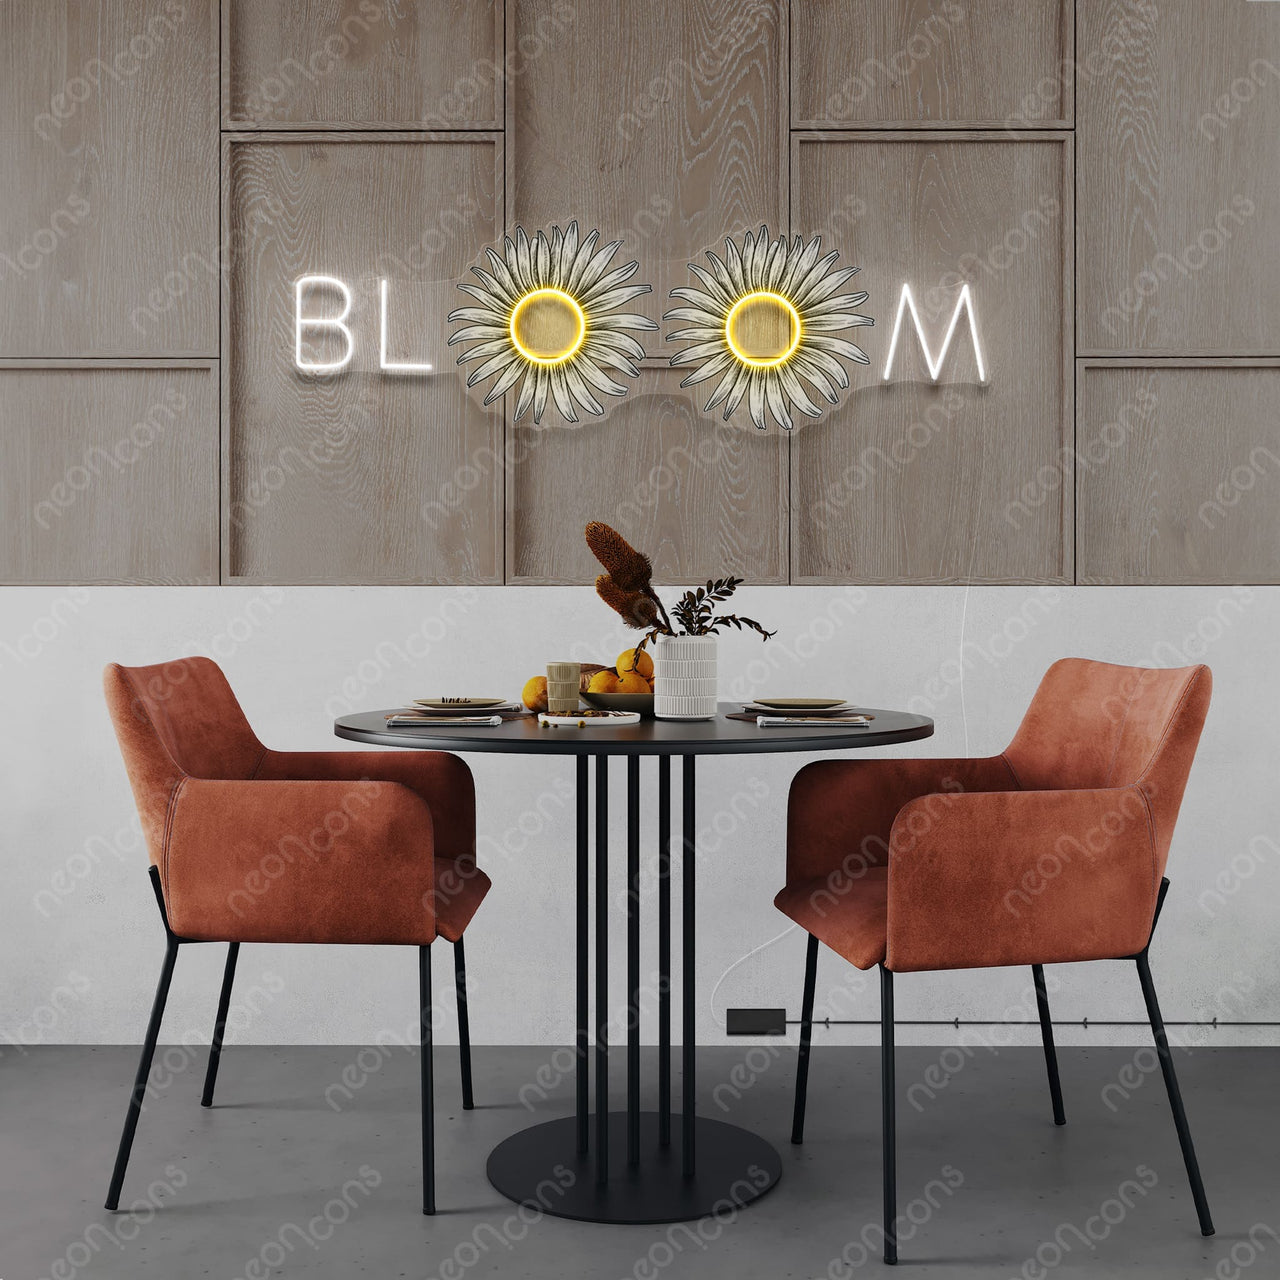 "Bloom" LED Neon x Acrylic Print by Neon Icons